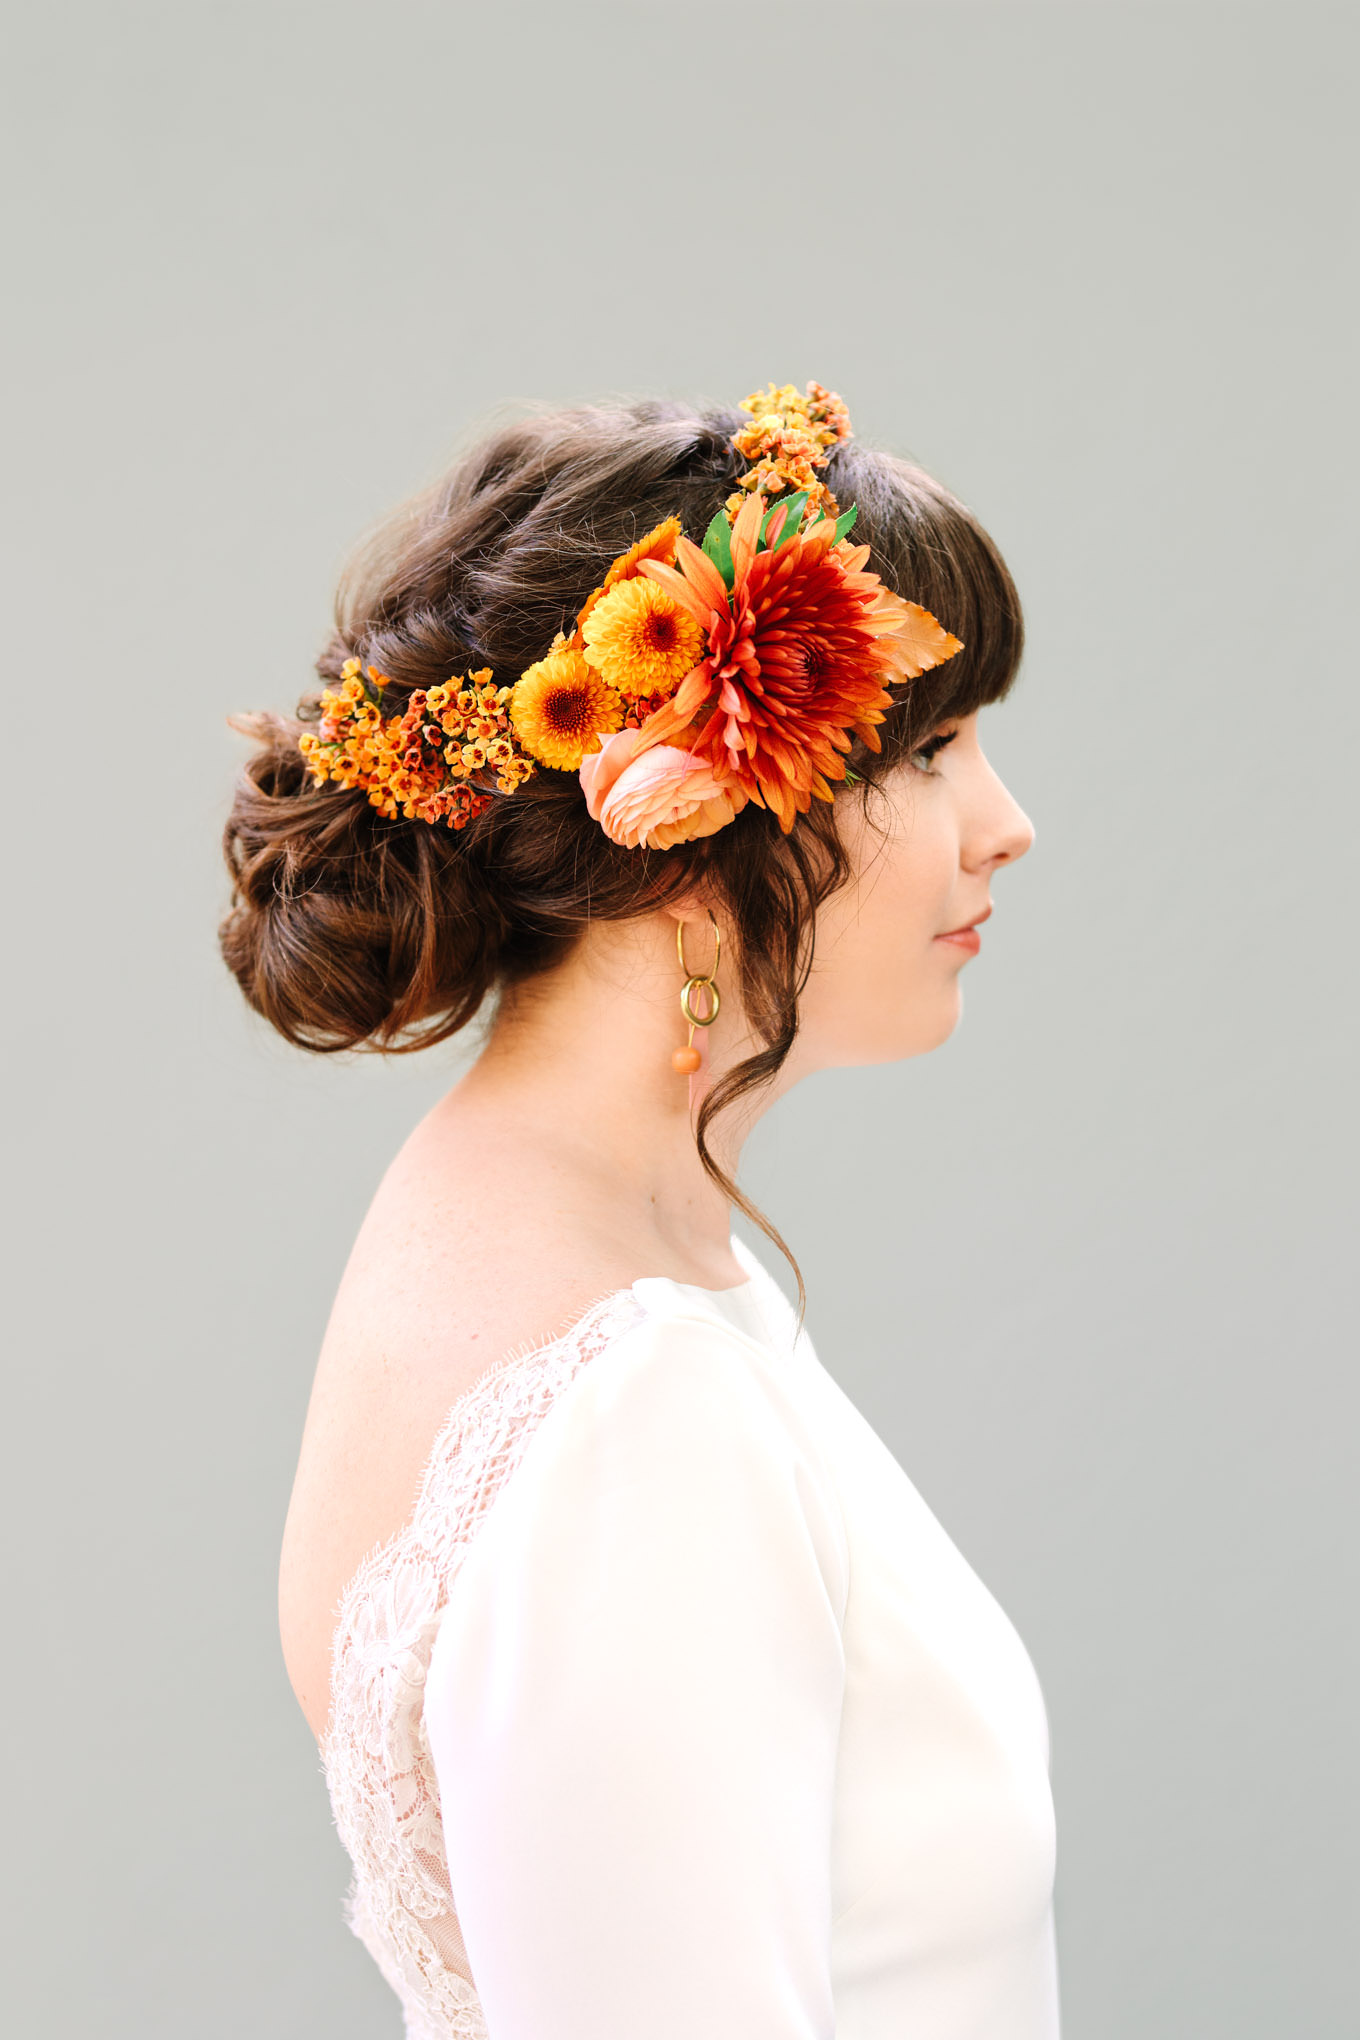 Bridal updo with colorful autumn flower crown | Engagement, elopement, and wedding photography roundup of Mary Costa’s favorite images from 2020 | Colorful and elevated photography for fun-loving couples in Southern California | #2020wedding #bridalupdo #weddinghair #flowercrown #microwedding   Source: Mary Costa Photography | Los Angeles